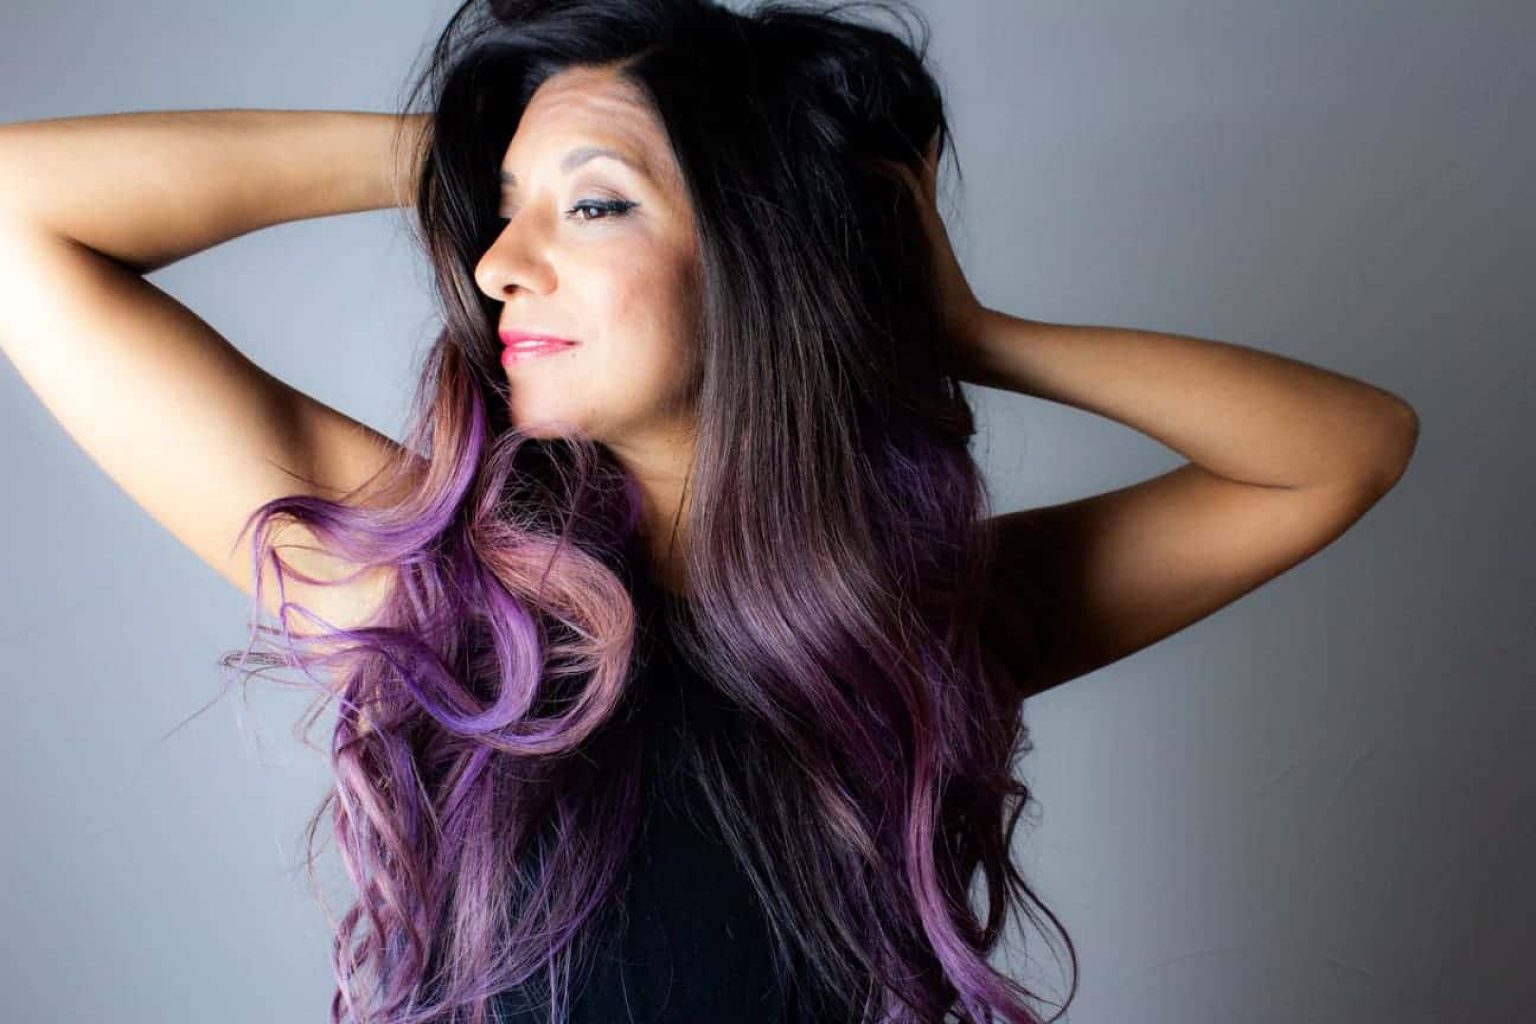 7. "Blue Green Hair Color for Dark Hair: How to Achieve the Look Without Bleaching" - wide 1